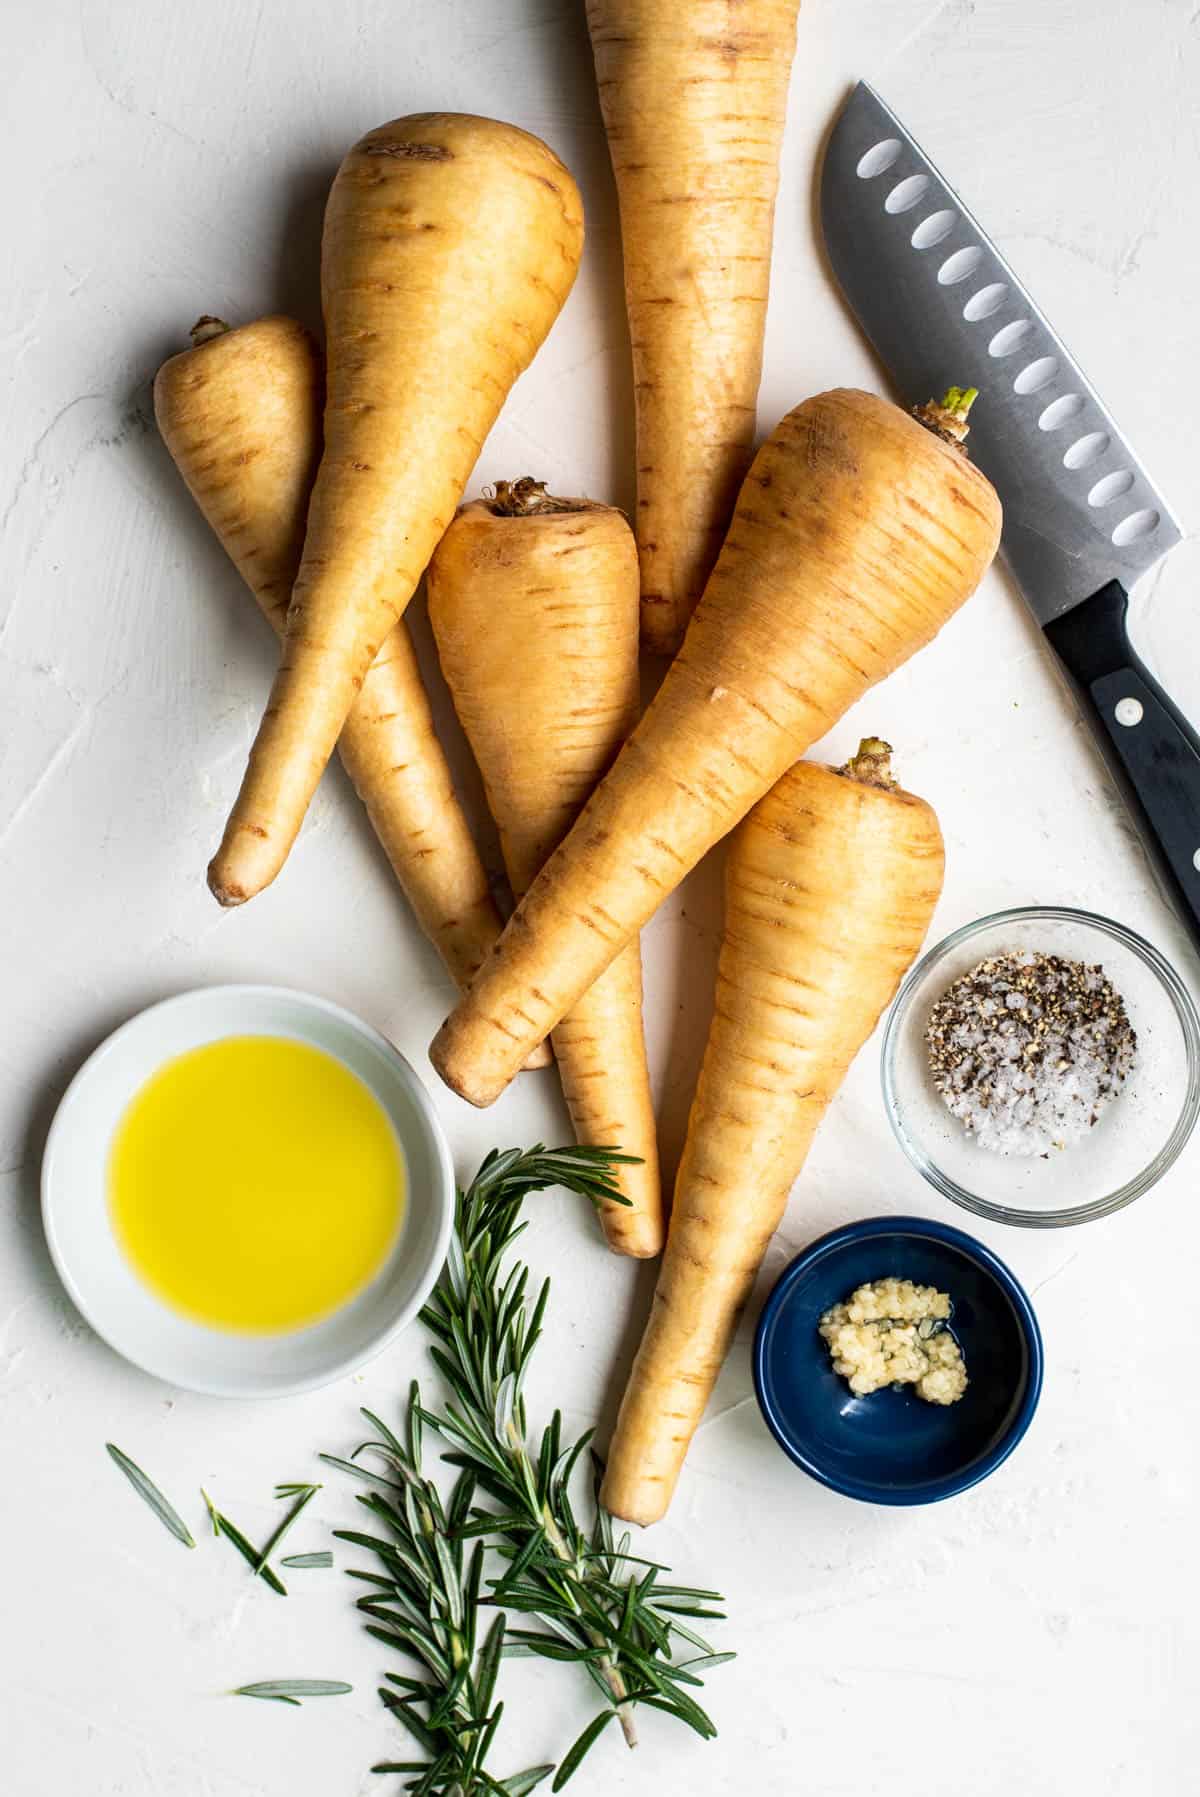 all of the ingredients for roasted parsnips on a white countertop